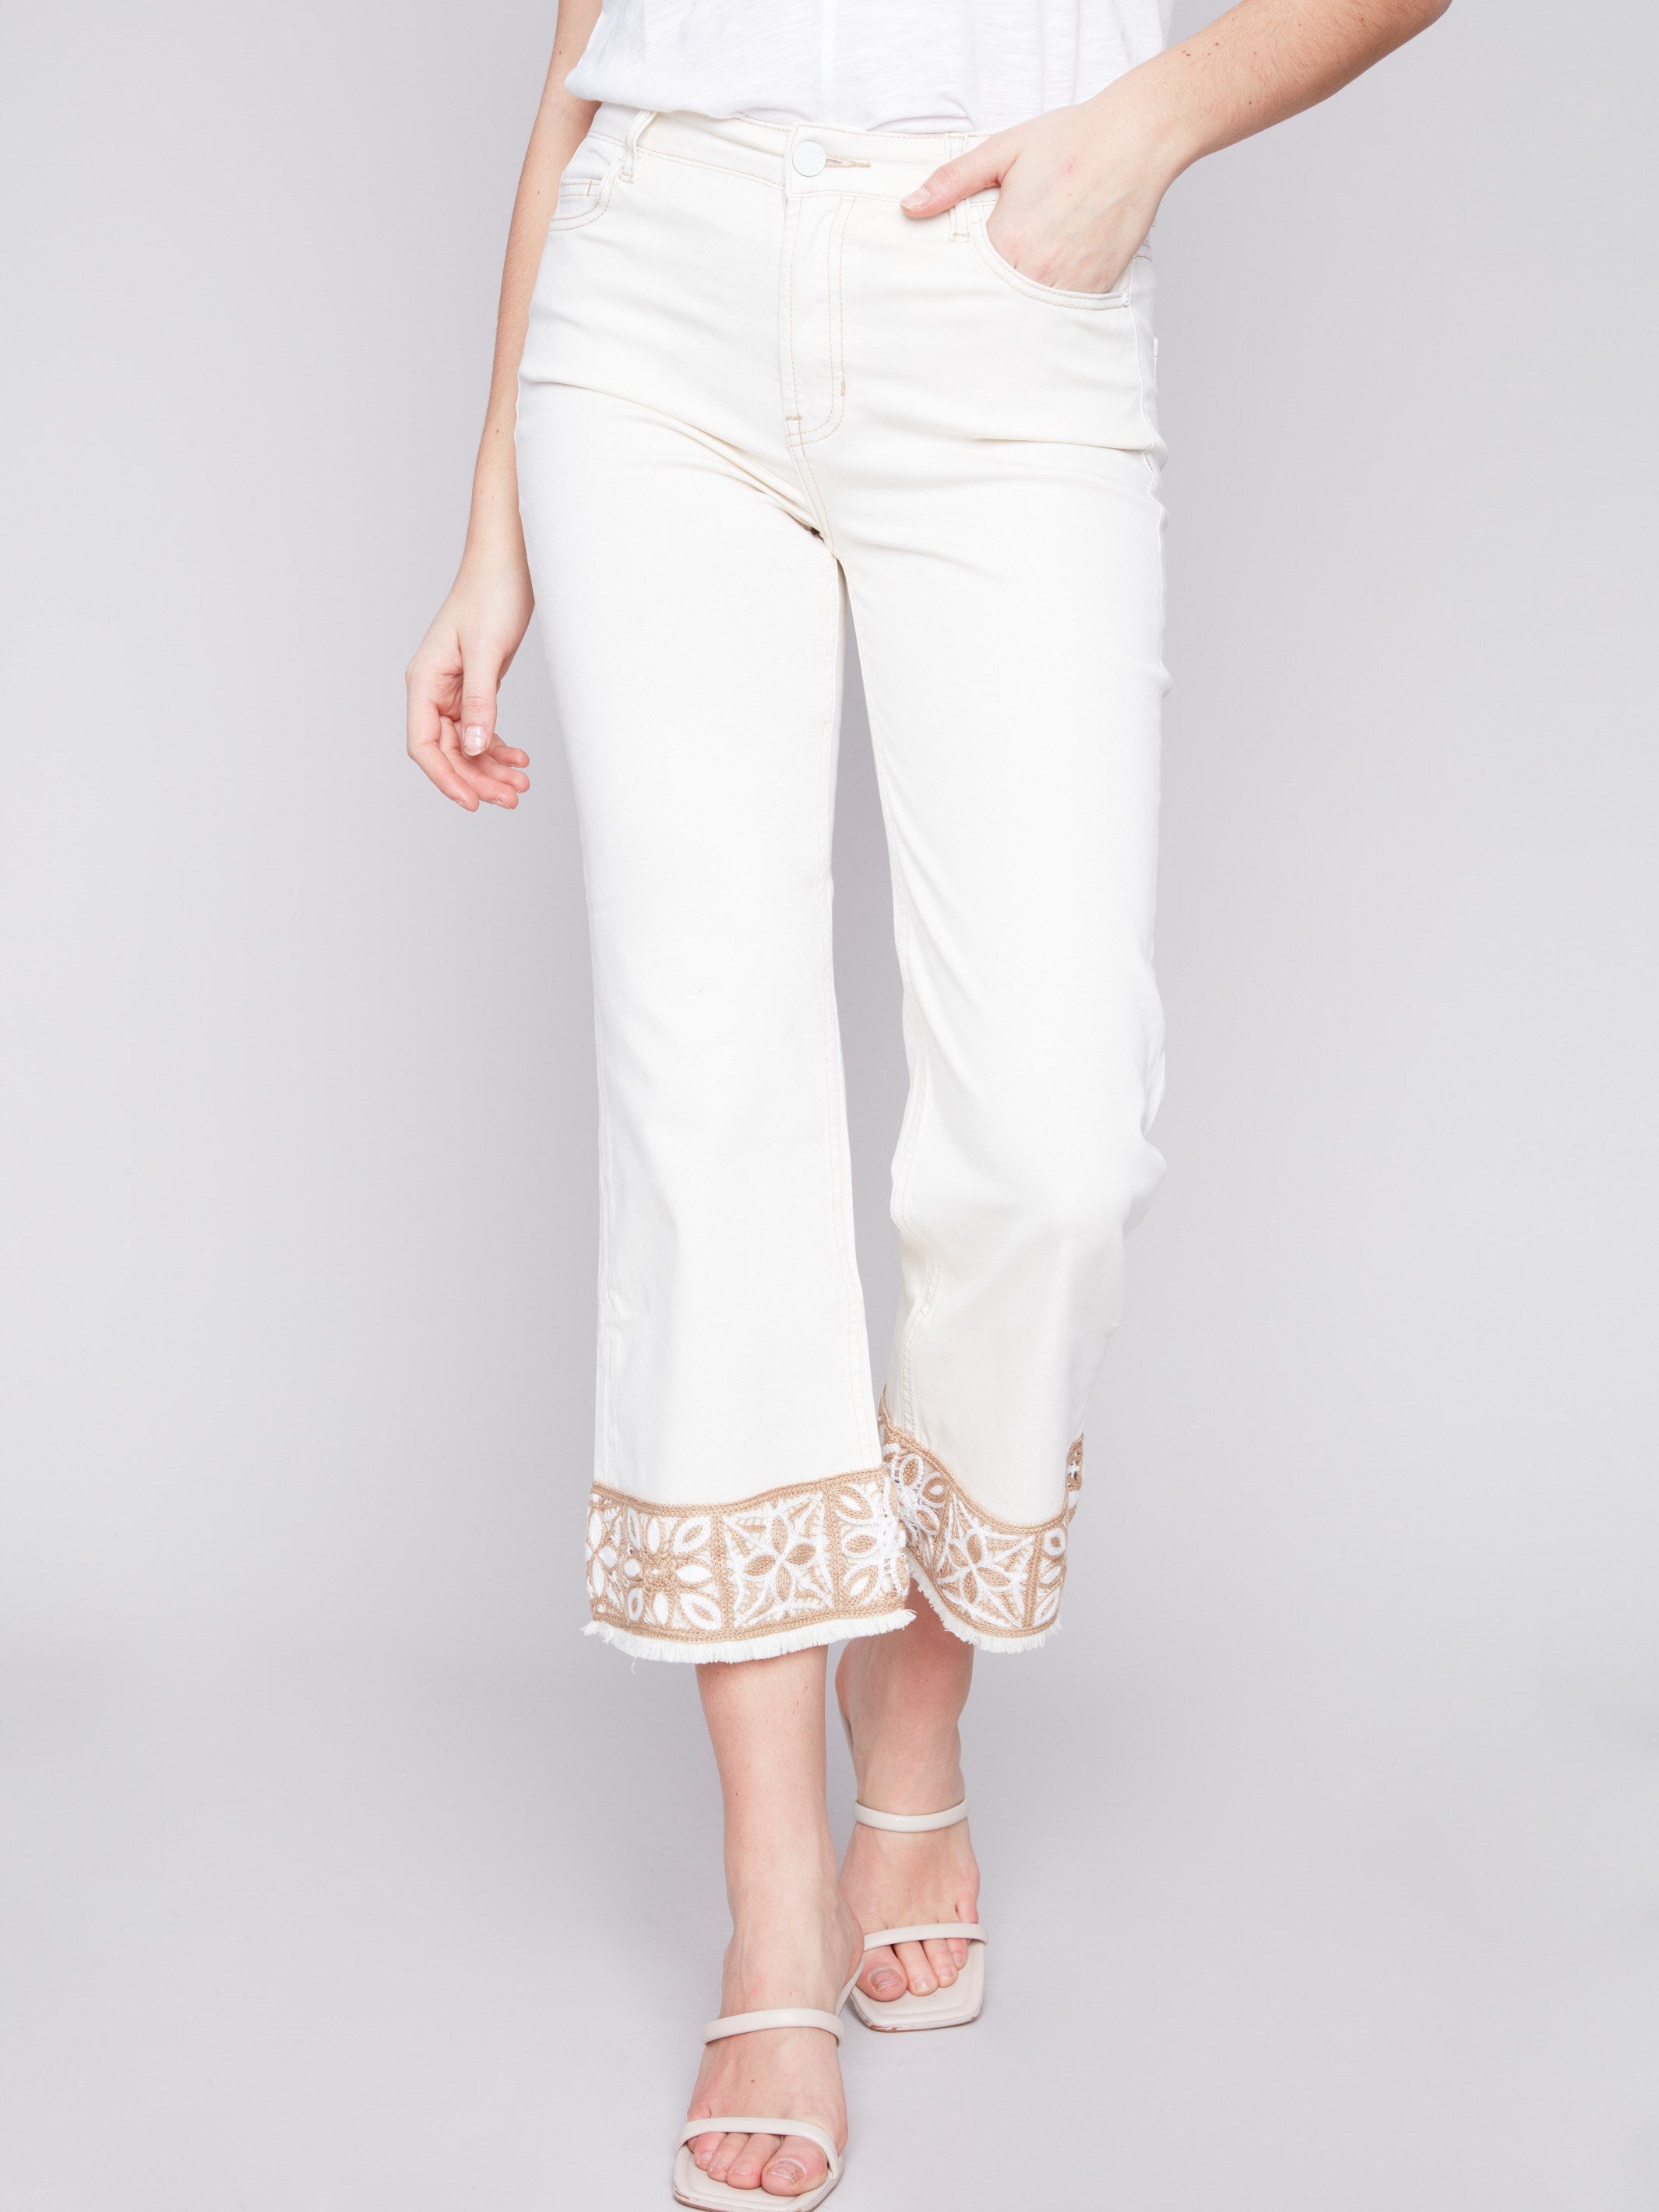 Charlie B Twill Pants with Crochet Cuff - Natural - Image 2